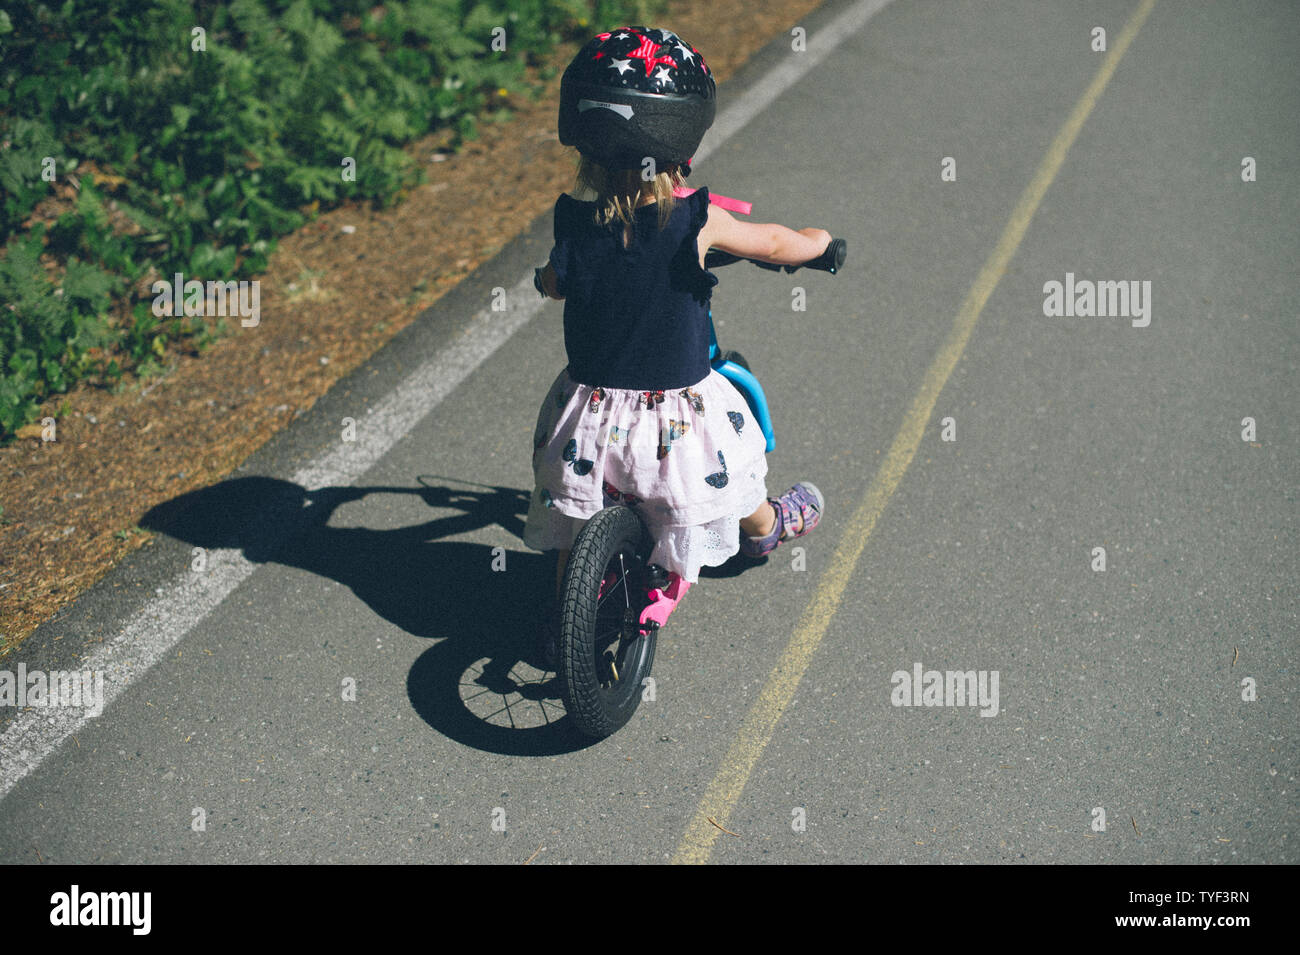 A young girl rides a run bike on a bike path beside a forest. Stock Photo